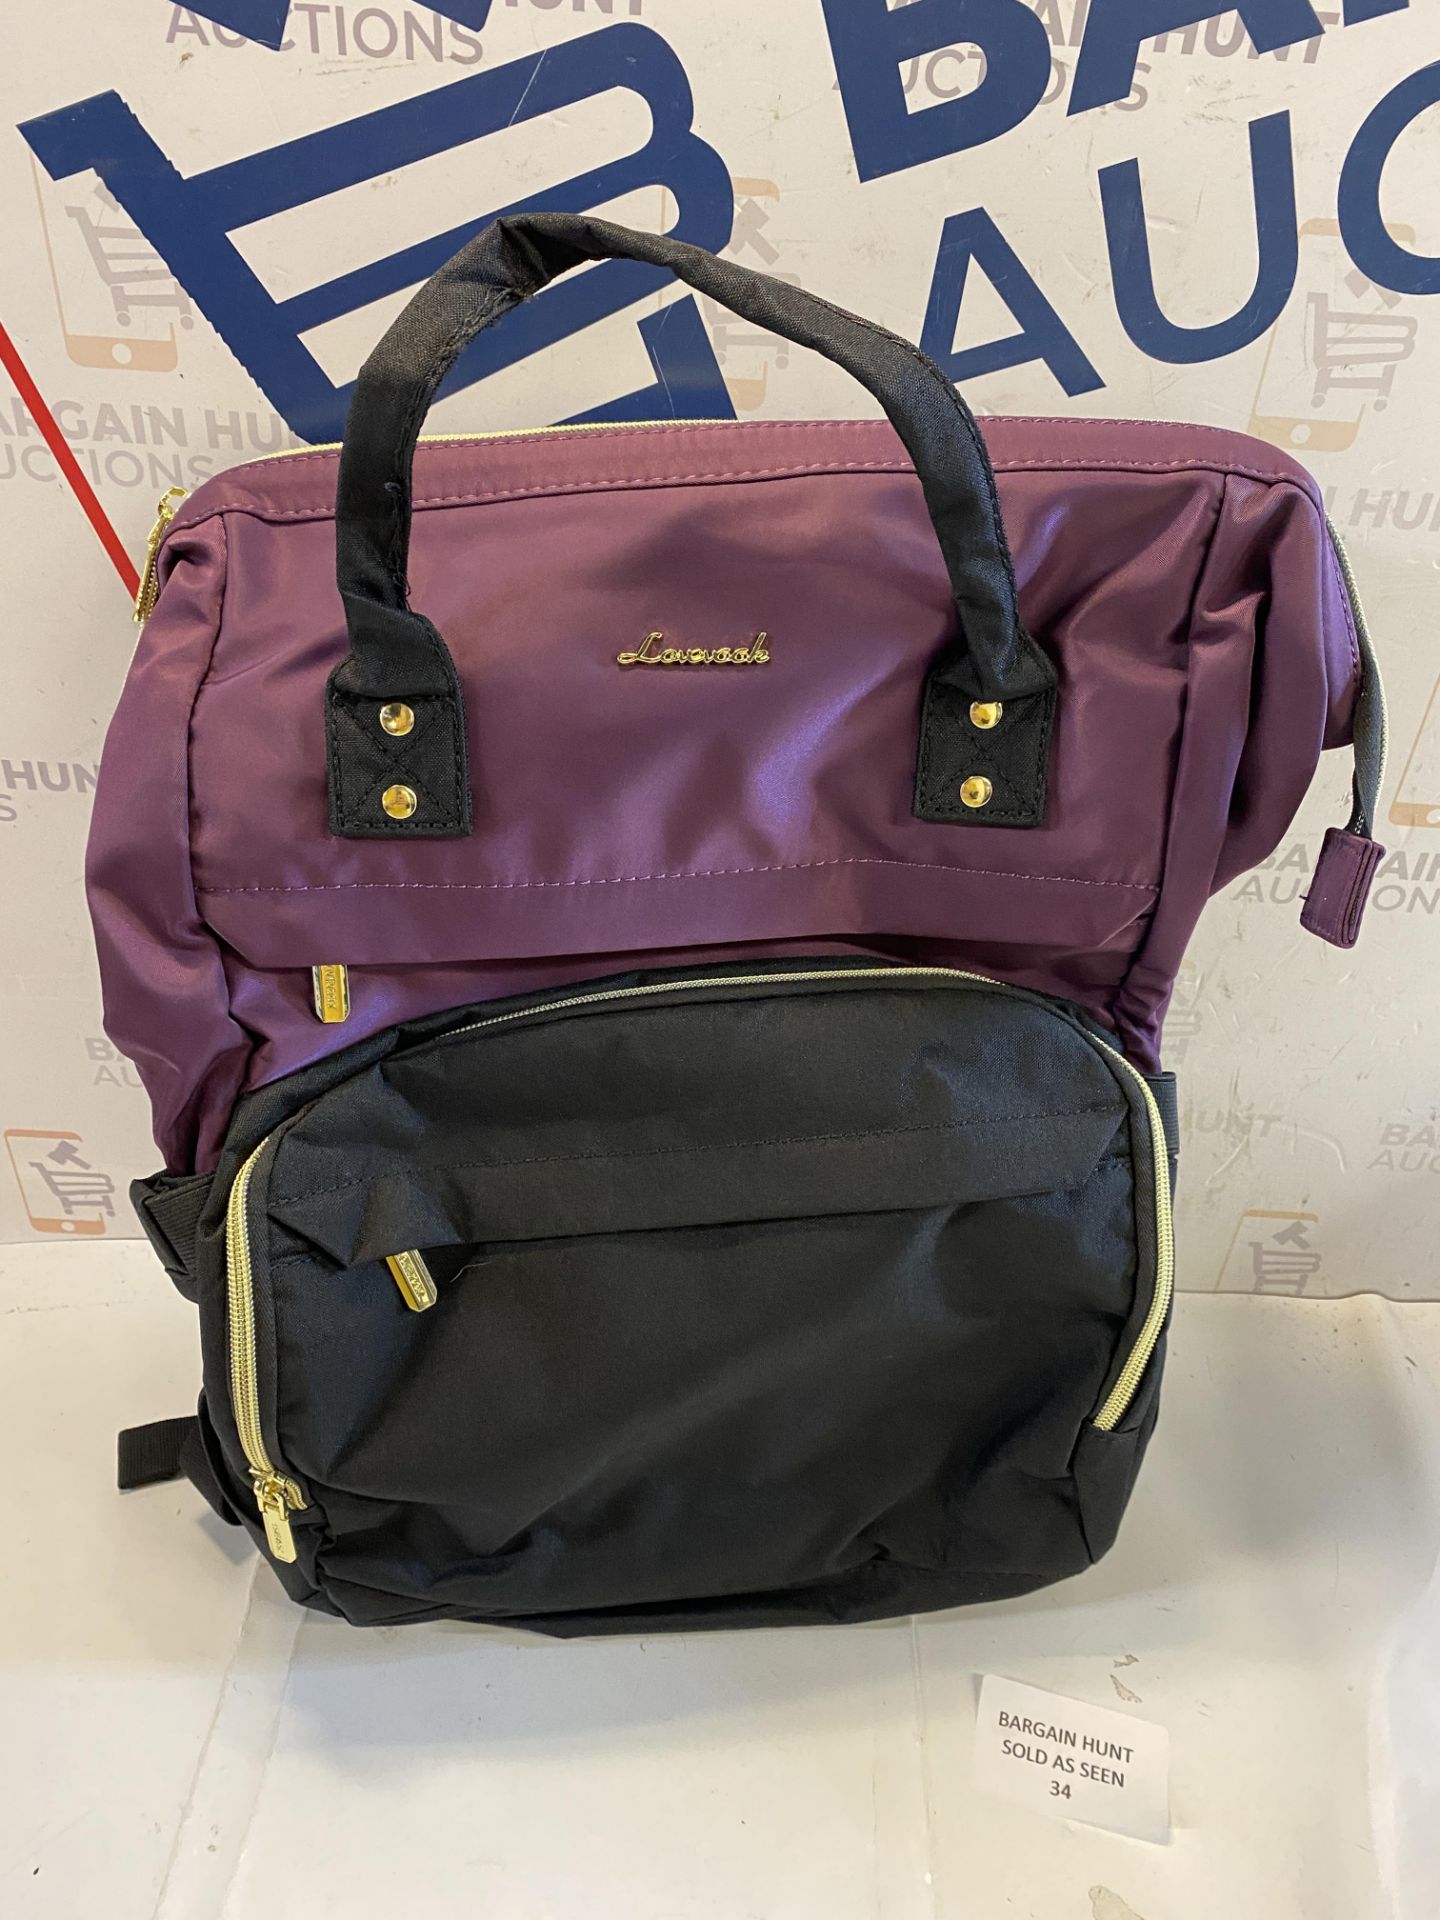 RRP £35.99 LOVEVOOK Laptop Backpack 15.6 inch, Large Rucksack Bag for Women with USB Port, - Image 2 of 2